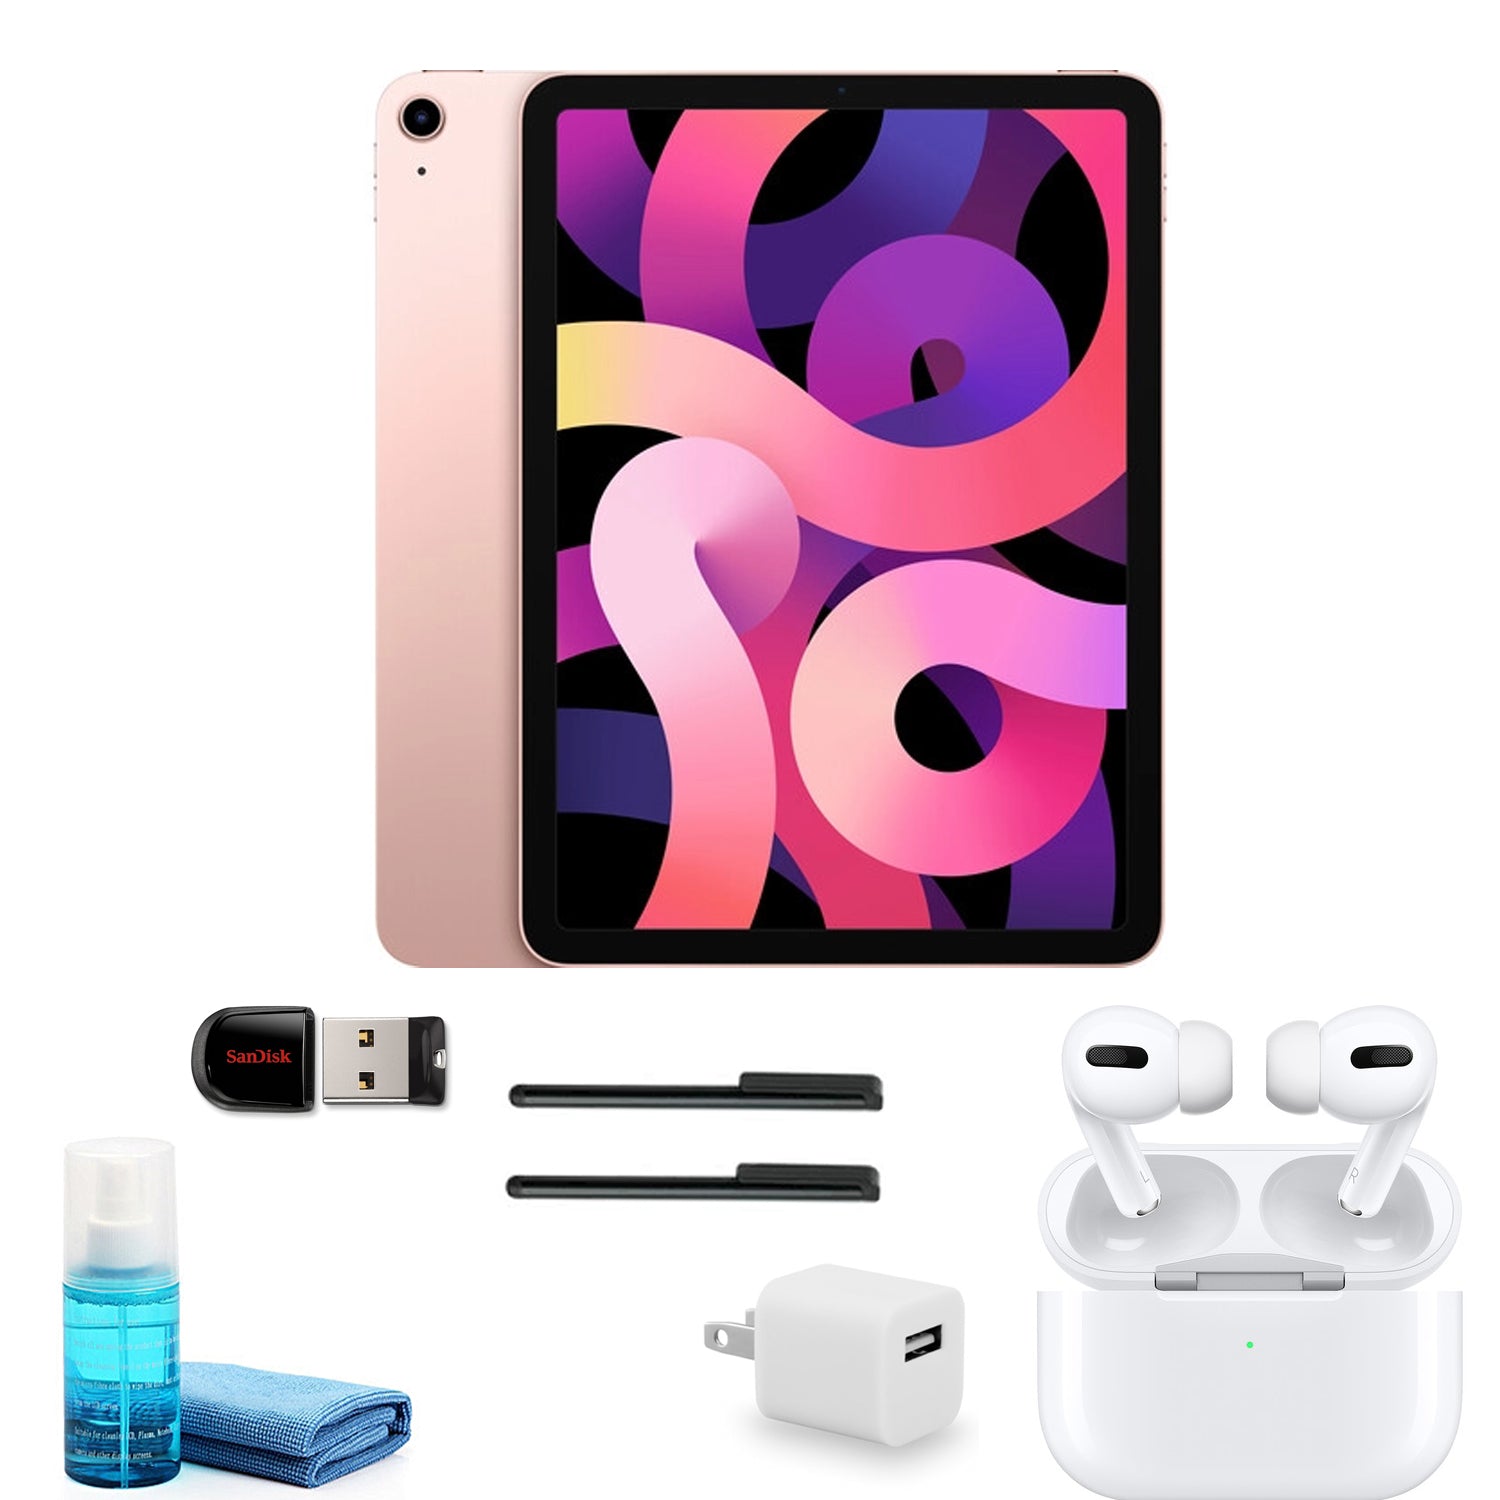 Apple iPad Air 10.9 Inch (64GB, Rose Gold) with Apple AirPods Pro and more